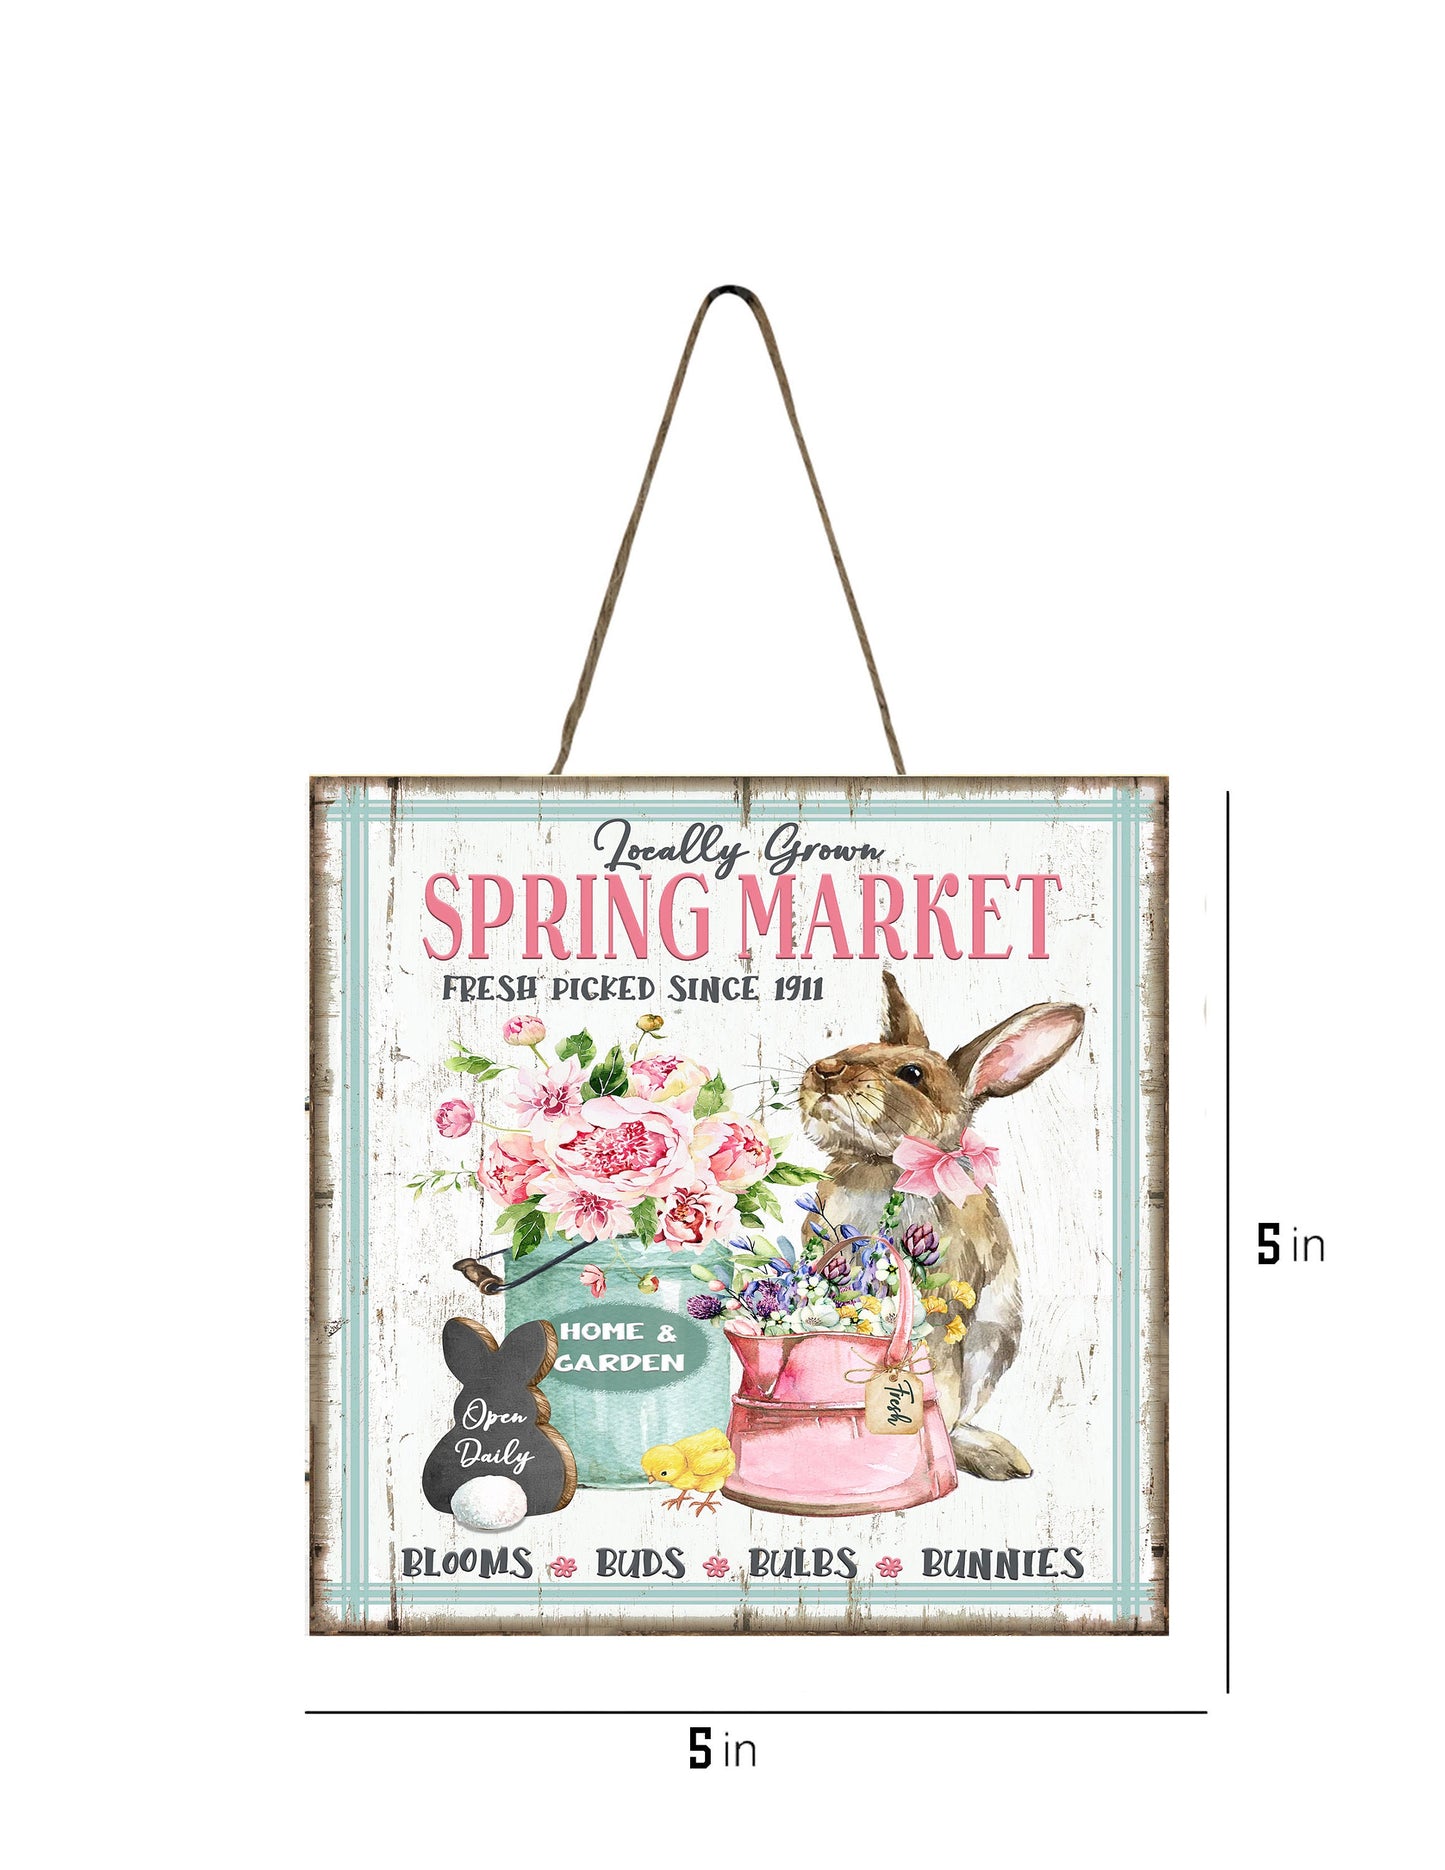 Locally Grown Spring Market Printed Handmade Wood  Mini Sign Kitchen Sign